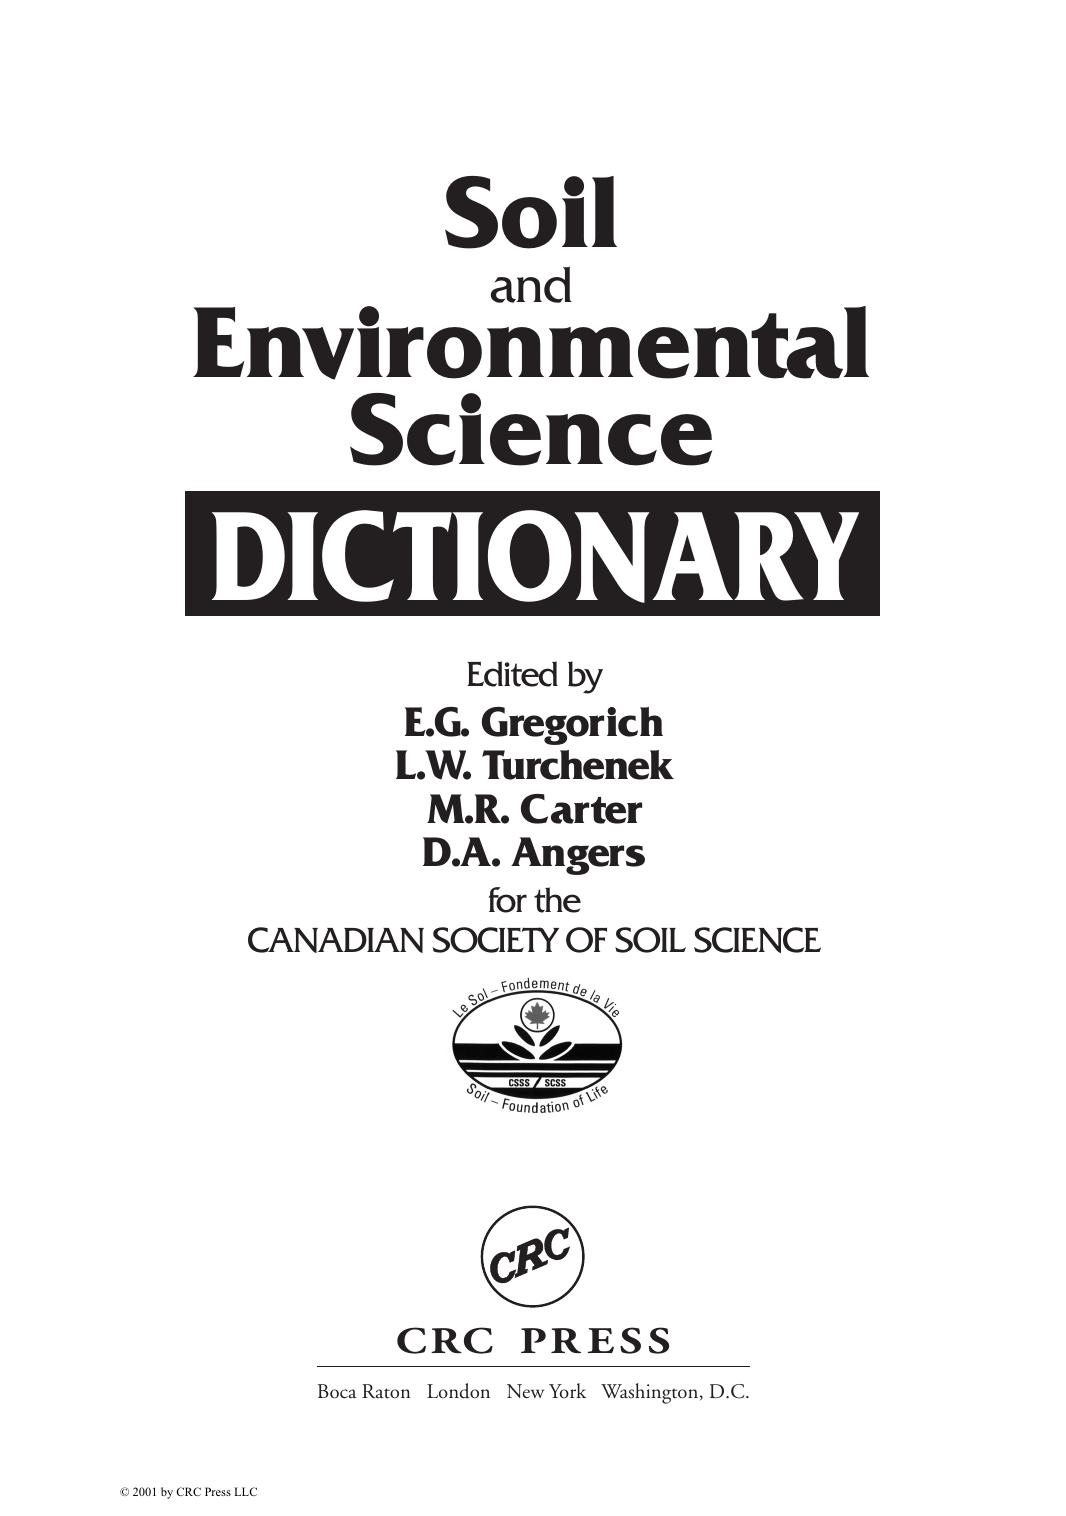 Soil and environmental science dictionary ( PDFDrive ), 2001